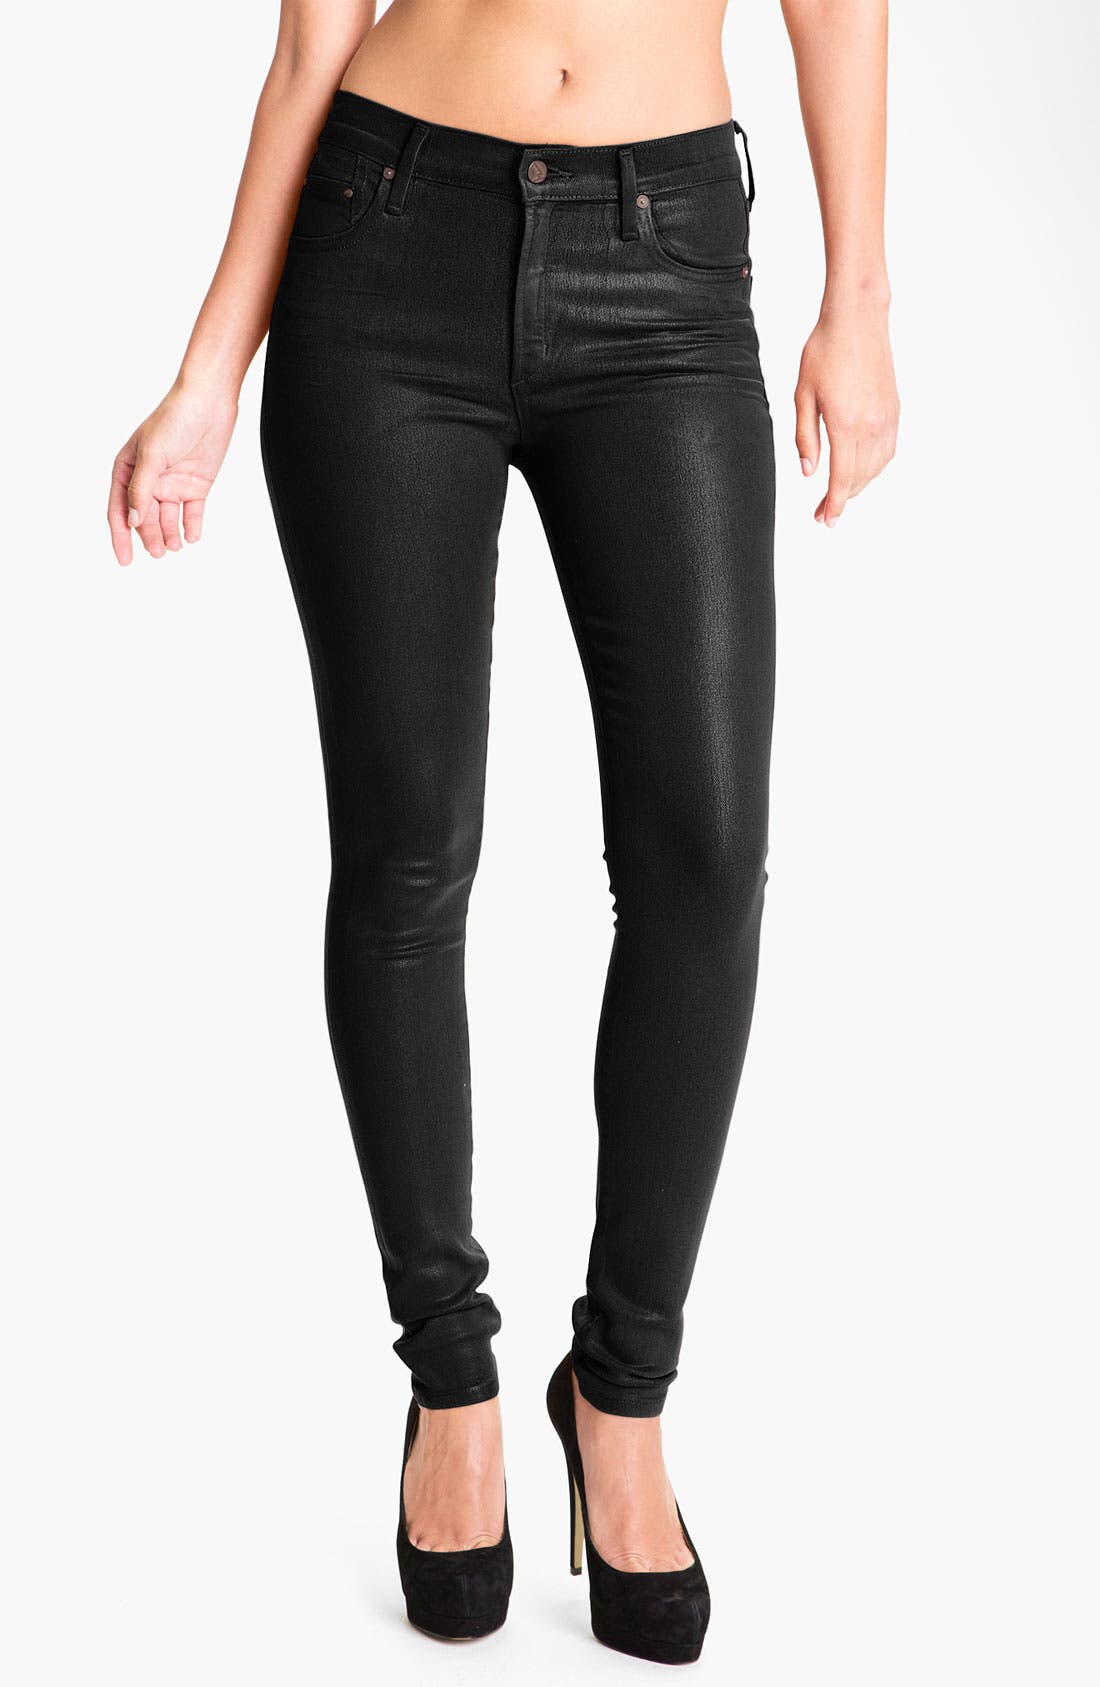 citizens of humanity rocket leatherette high rise skinny jeans